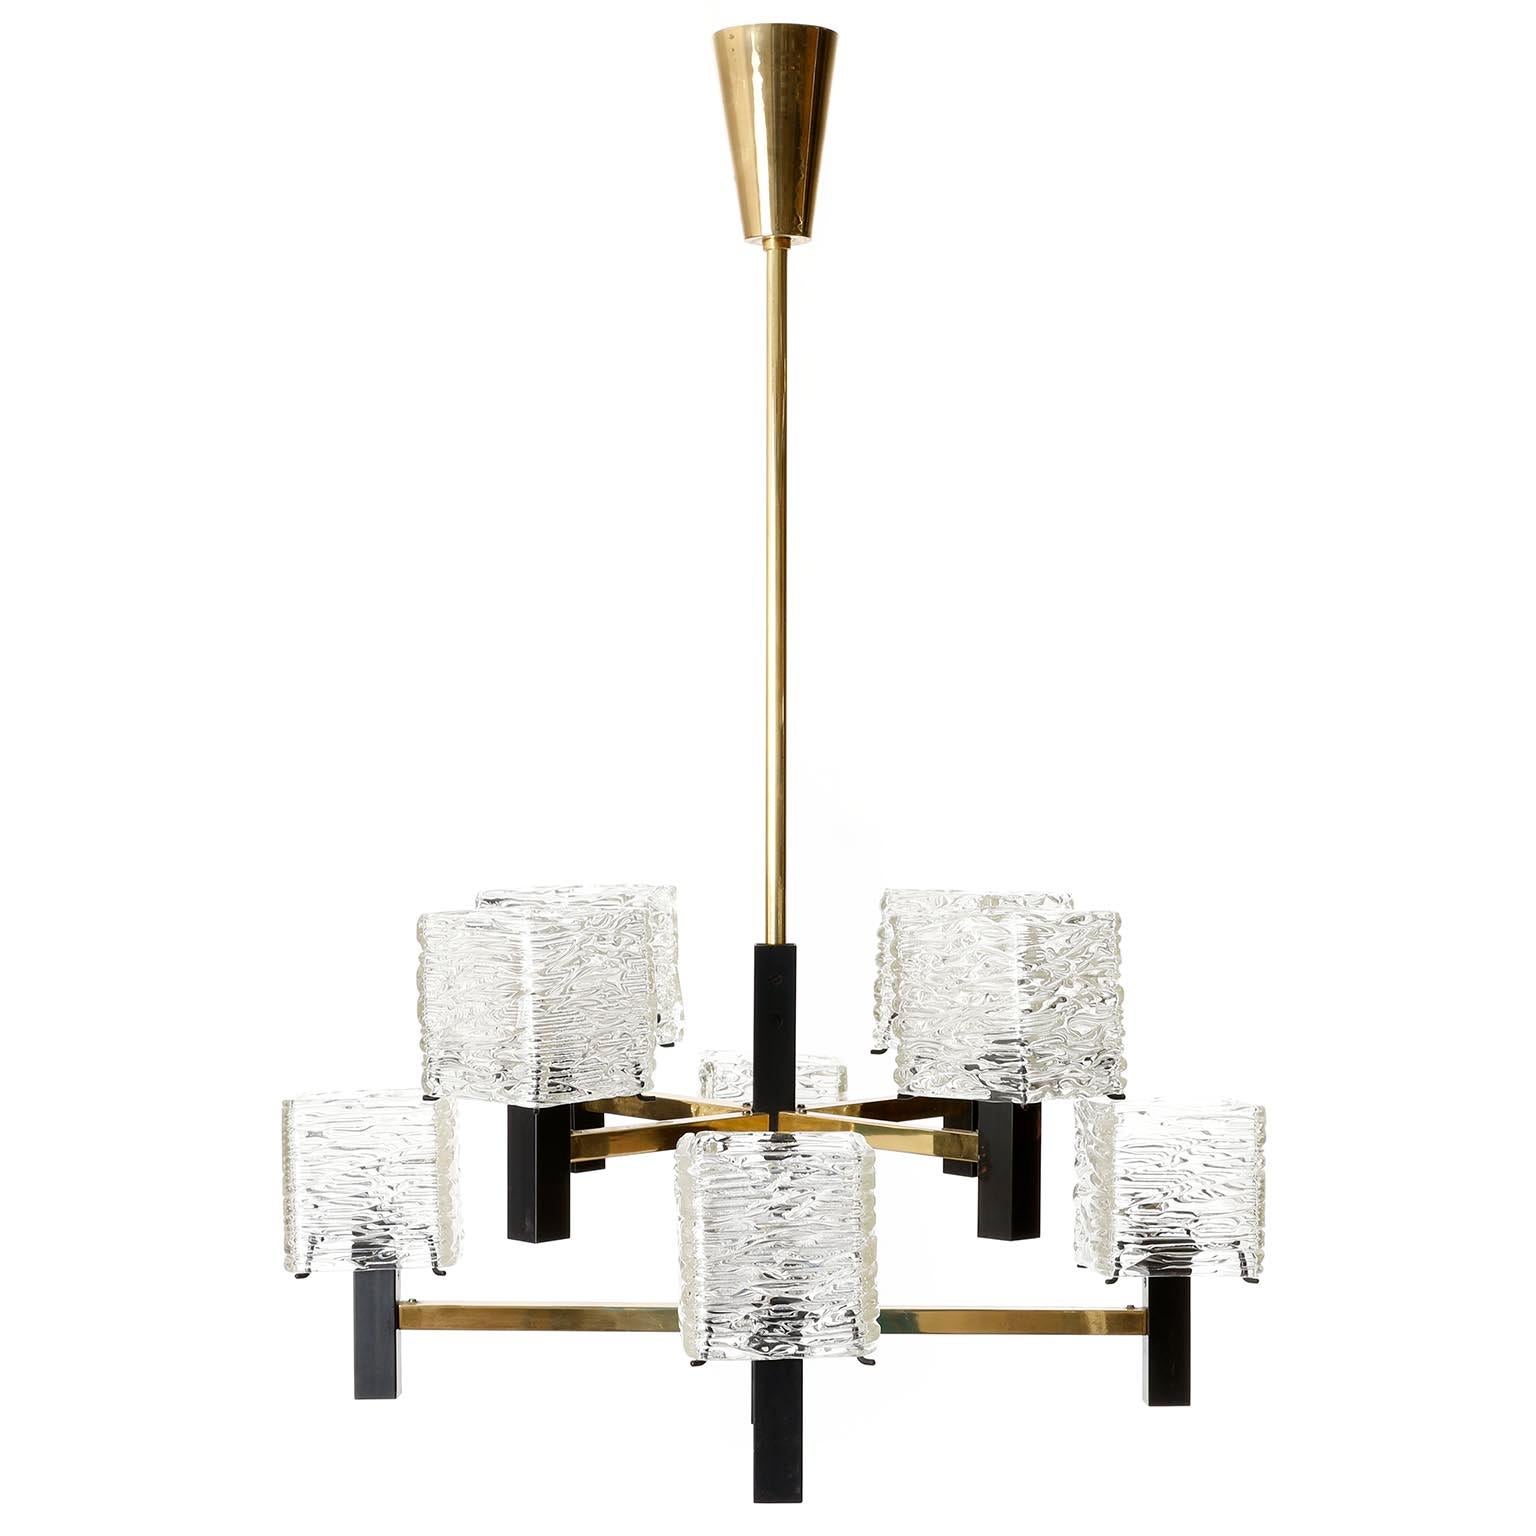 An eight-arm chandelier by J.T. Kalmar, Vienna, Austria, manufactured in midcentury, circa 1960 (late 1950s or early 1960s).
The fixture is made of a nice mixture of materials: square textured clear glass lamp shades, solid polished brass and black